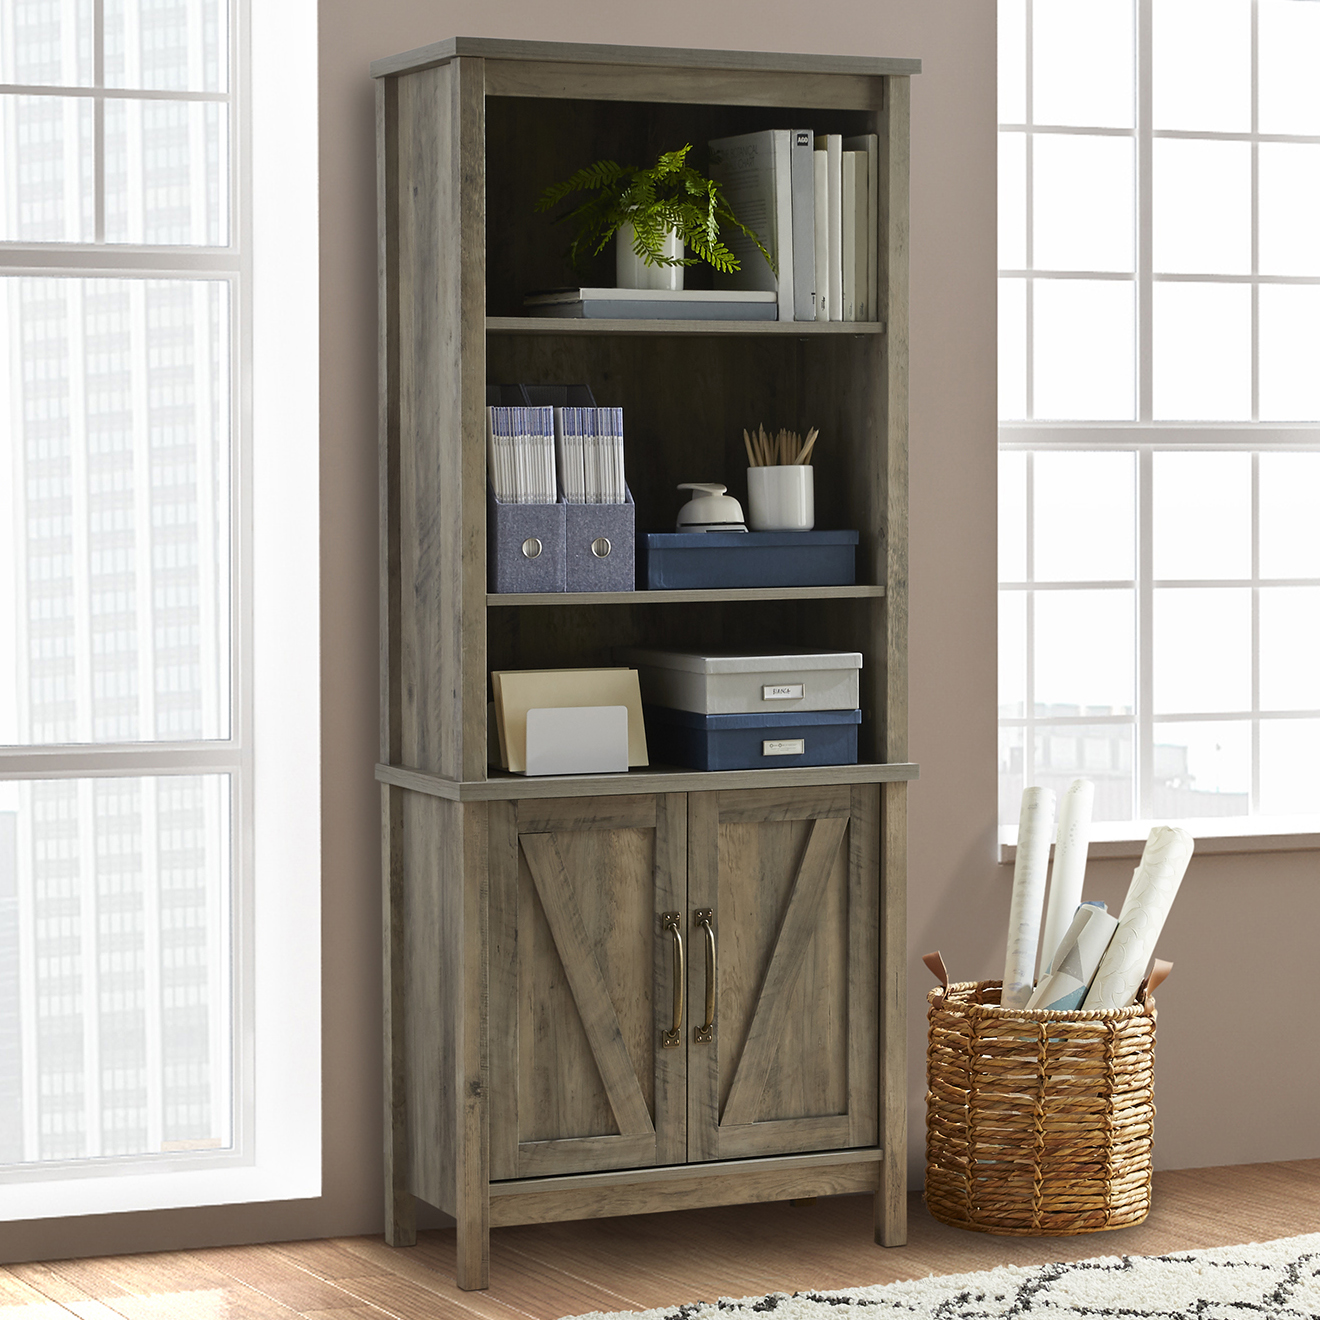 Better Homes & Gardens Modern Farmhouse 5 Shelf Library Bookcase with Doors, Rustic Gray Finish - image 1 of 16